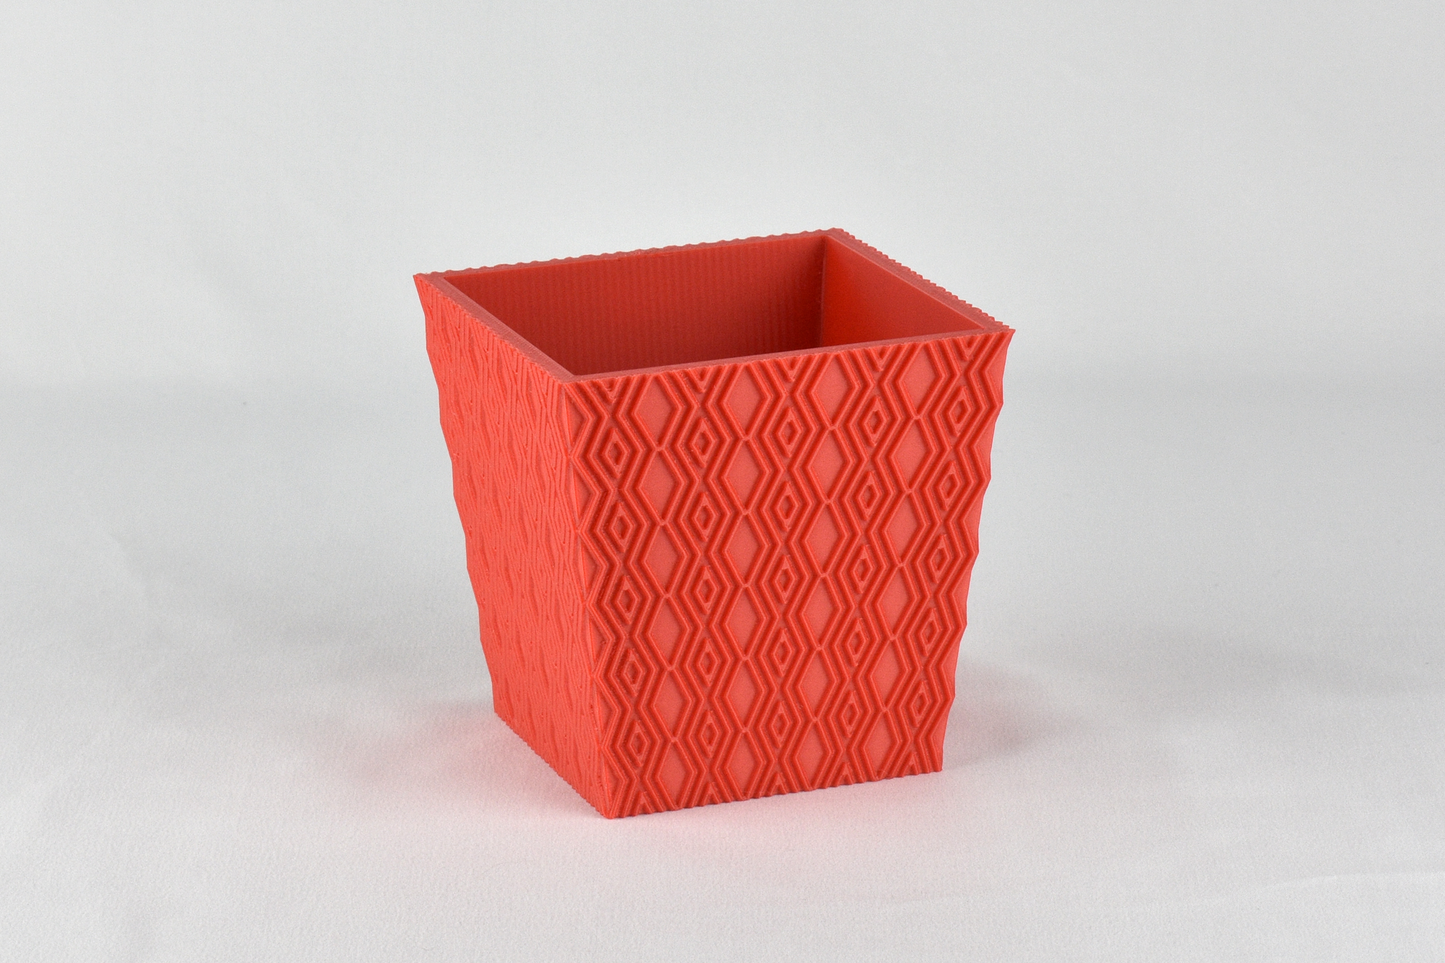 4-inch Square Planter, Geometric Pattern #4, Drainage and Optional Tray, Outdoor Safe